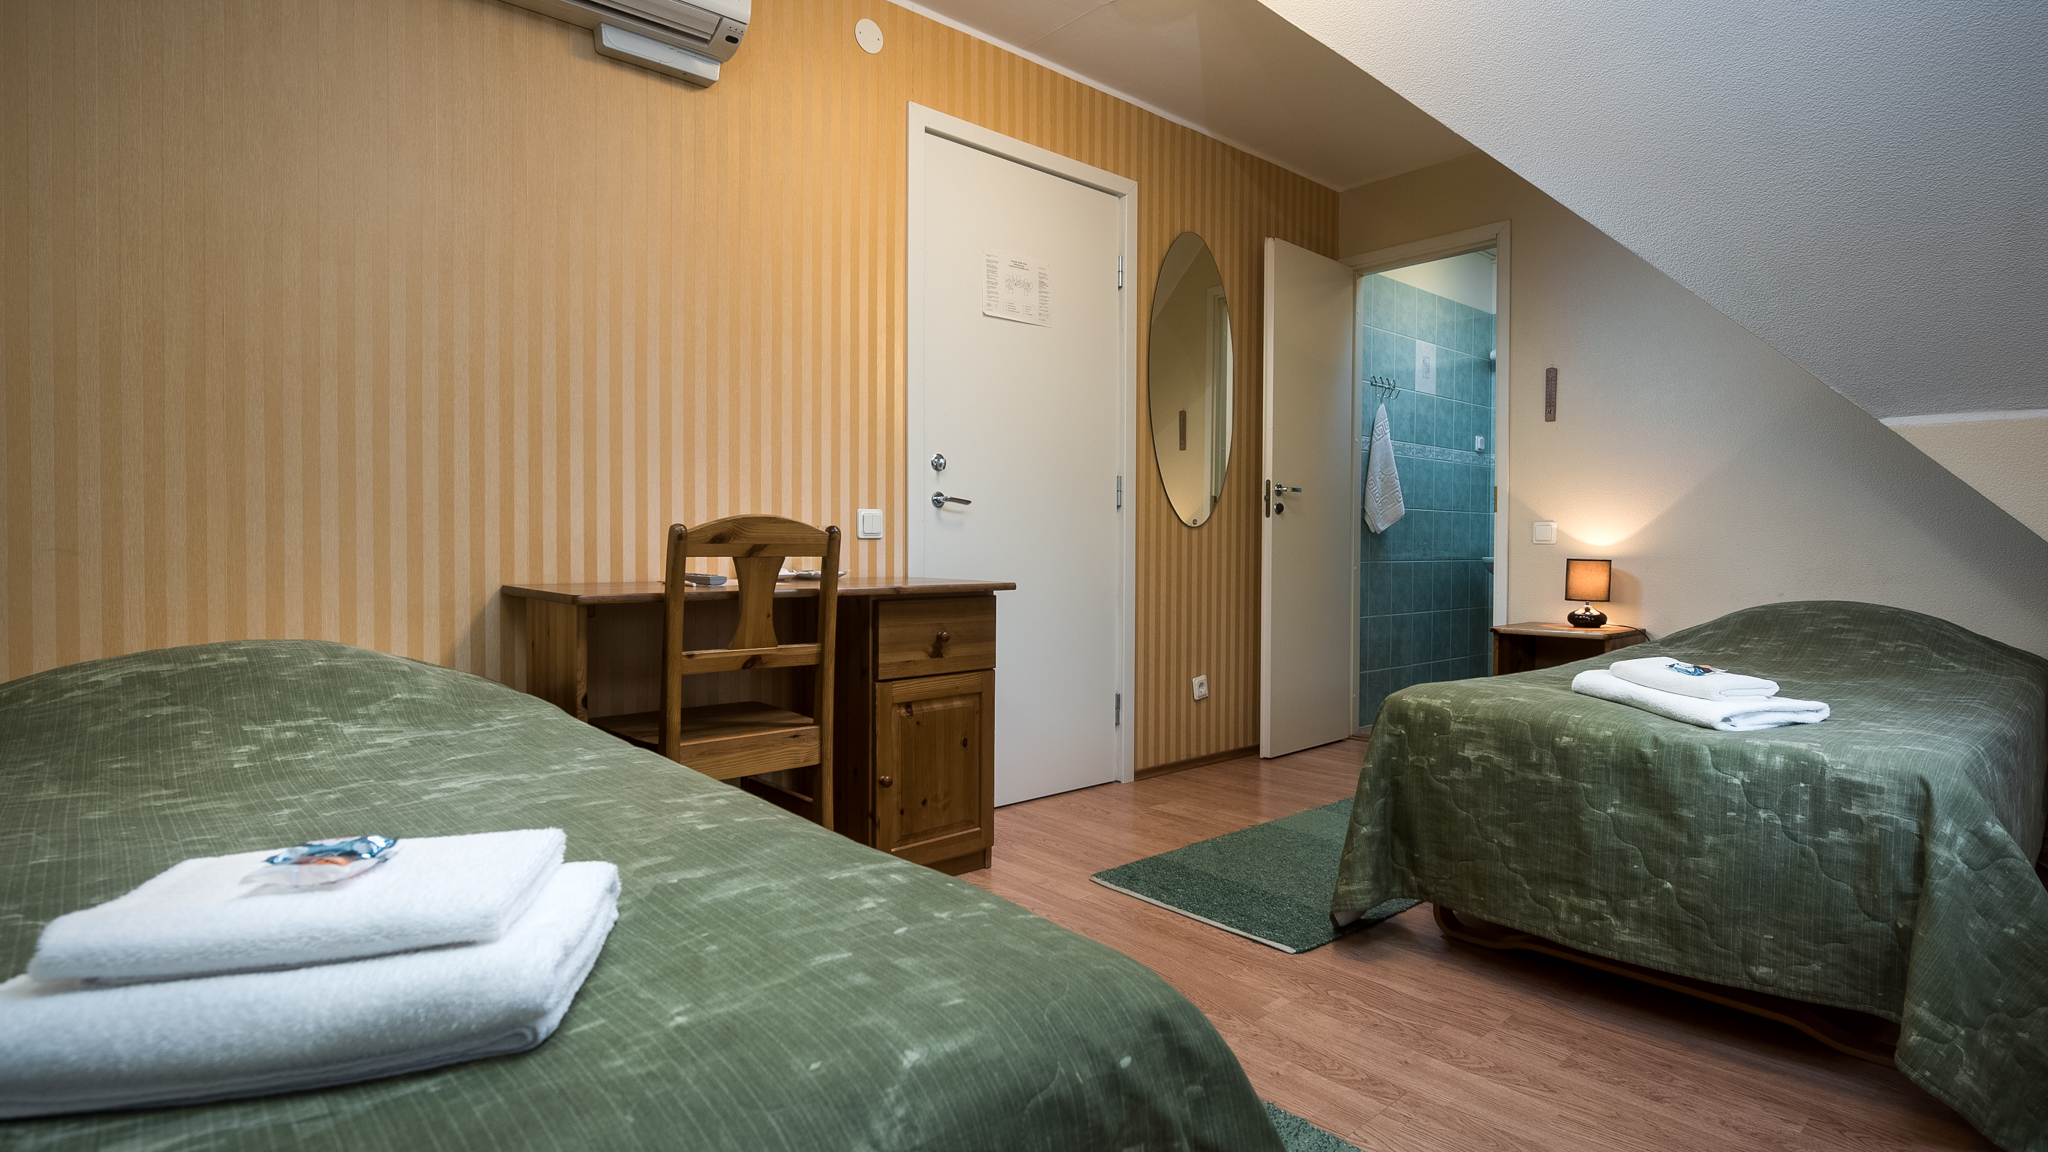 TWIN ROOM TWO SINGLE BEDS (start from 35€/night)